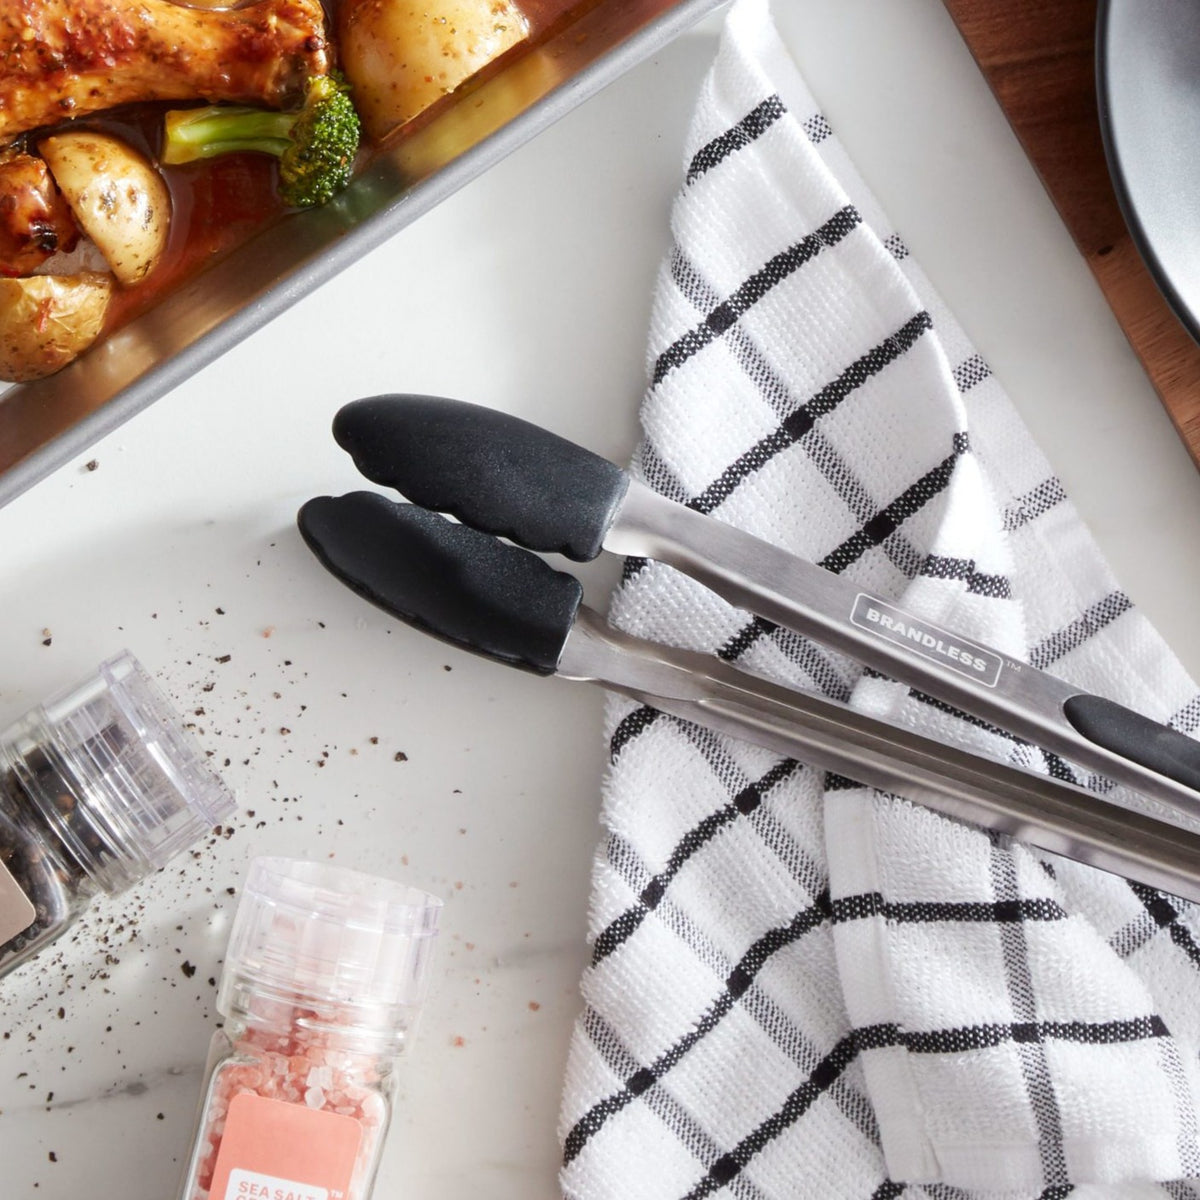 Lifestyle photo, silicone baking tongs in closed and locked position sitting on a kitchen counter next to a baking tray with chicken and vegetables on it and a kitchen towel near it.